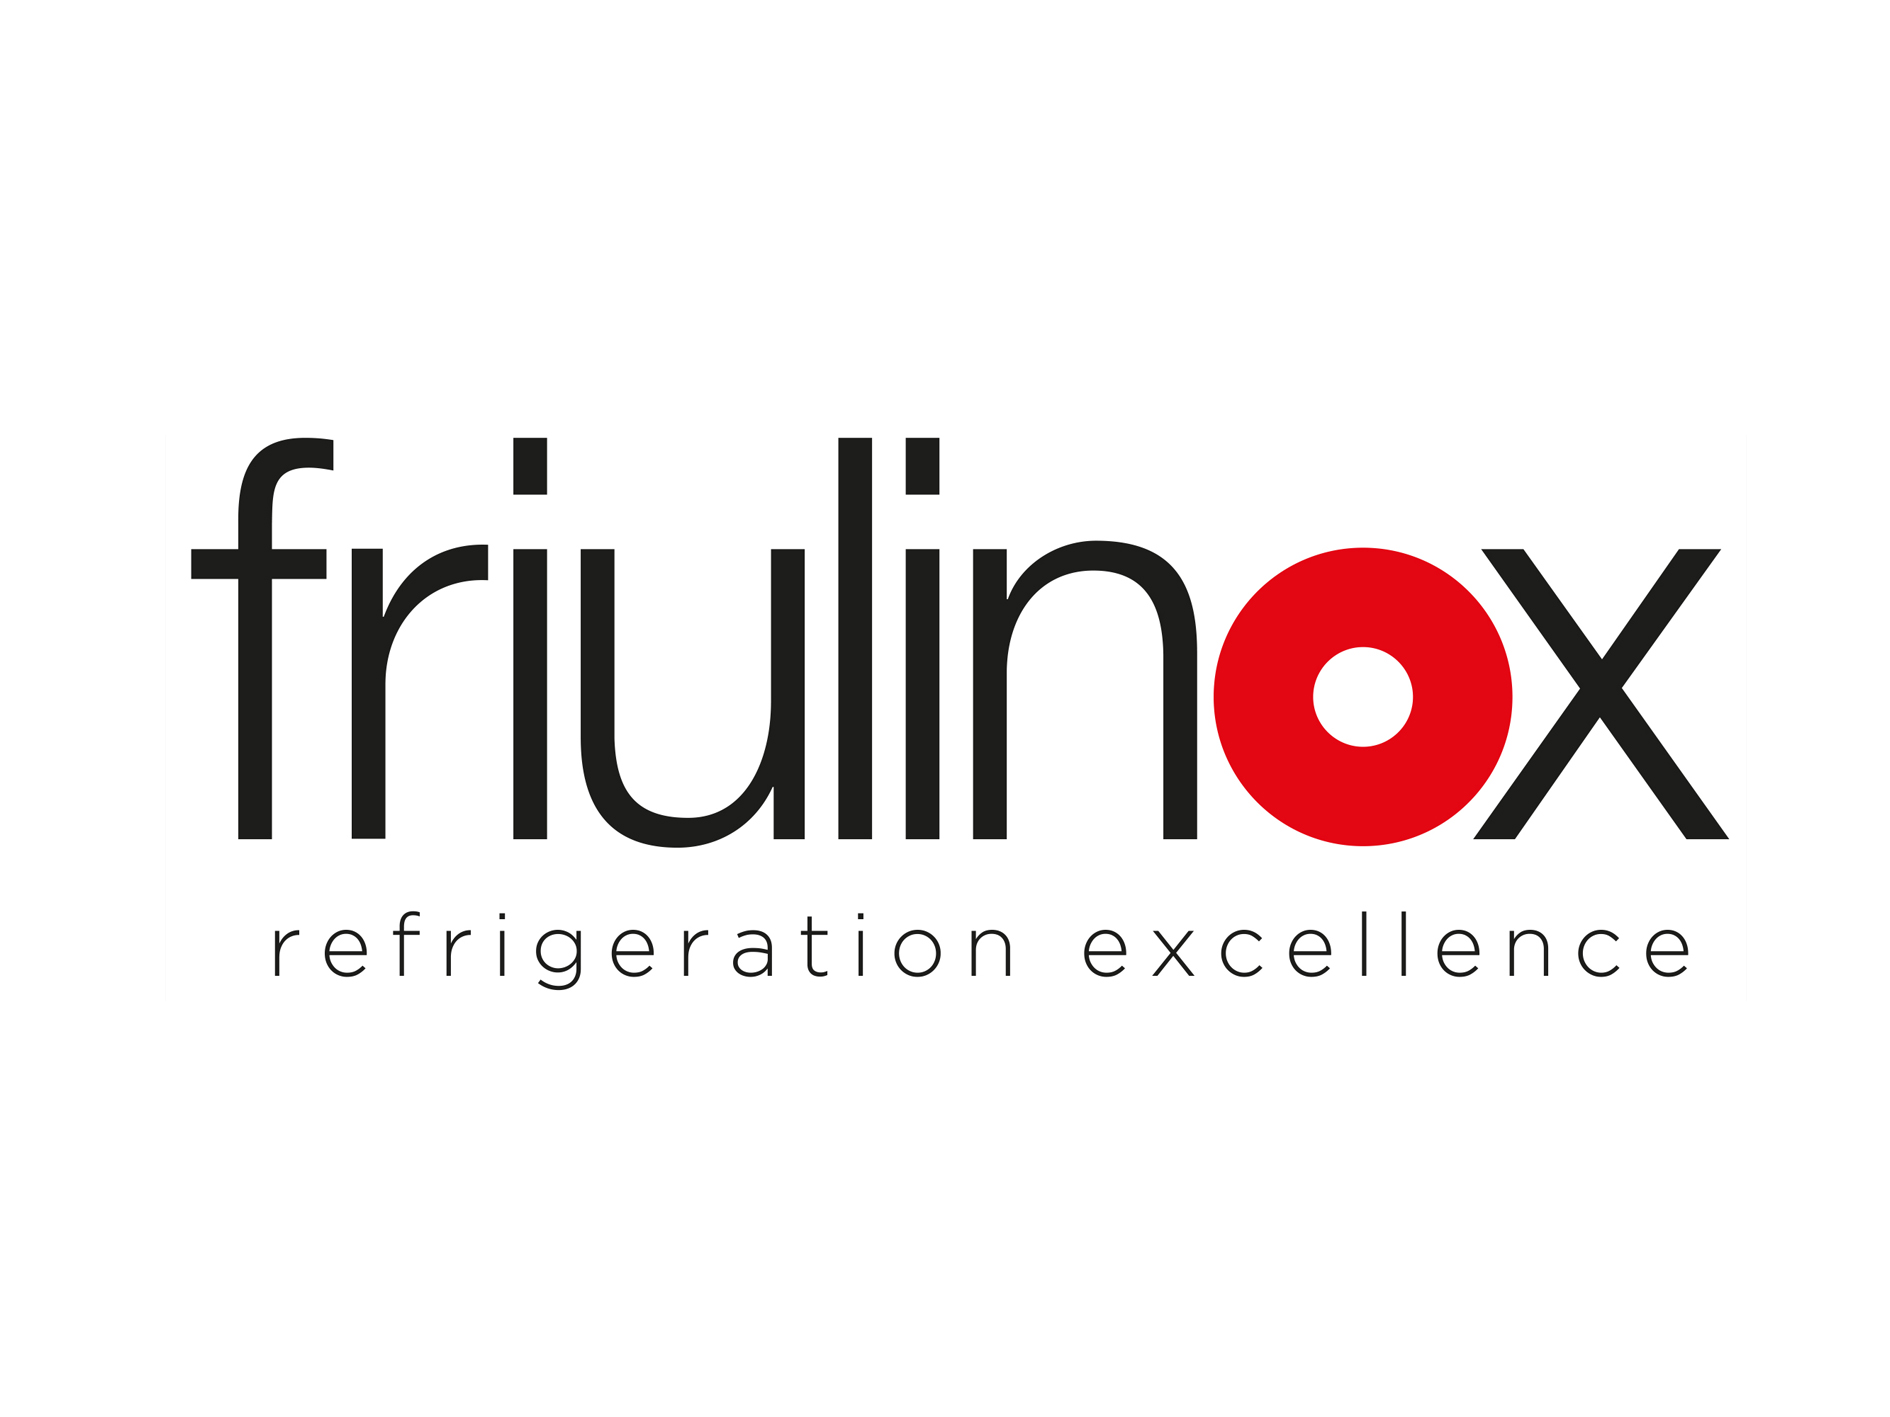 Friulinox and Hubbard Systems form exciting distribution partnership